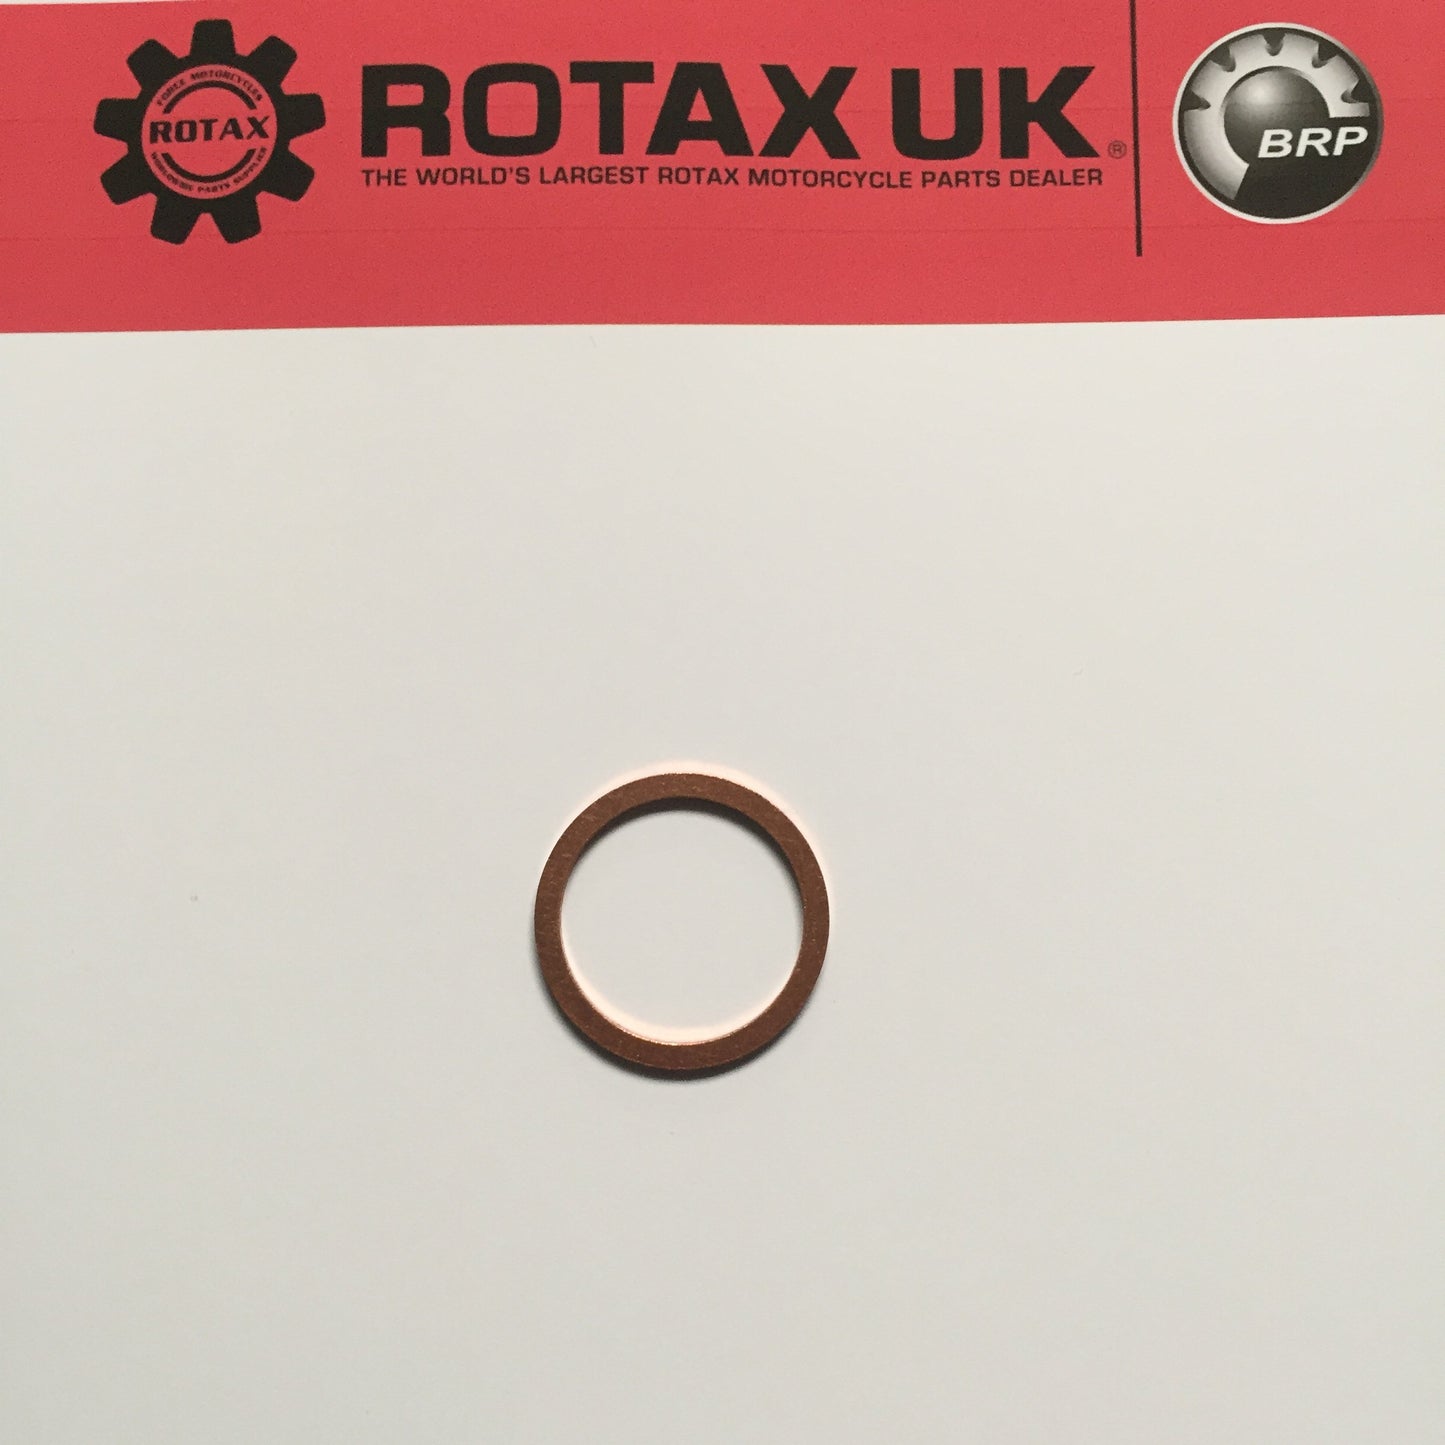 230080 - Exhaust Gasket Ring for engine types: 348, 504.